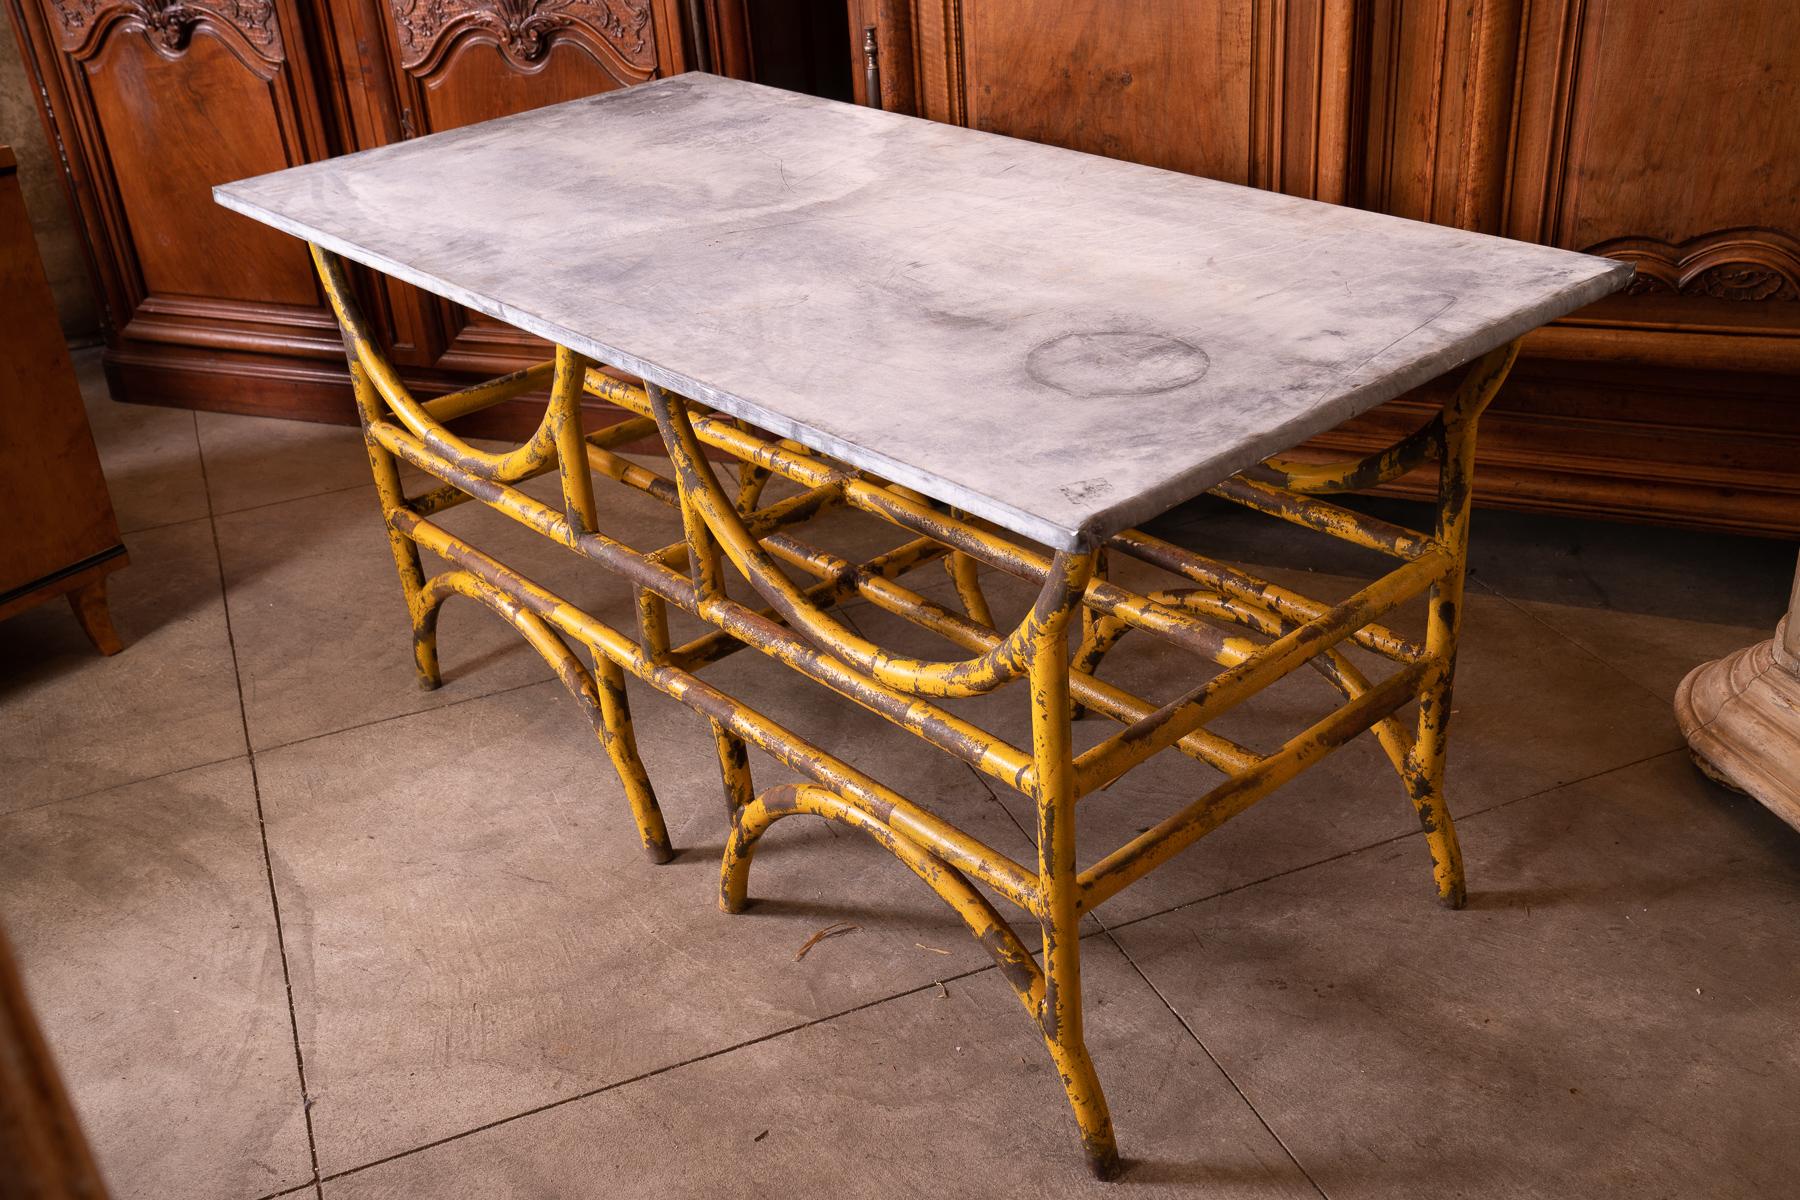 Wonderful French iron and stone butcher table perfect for indoor/outdoor kitchen decor.